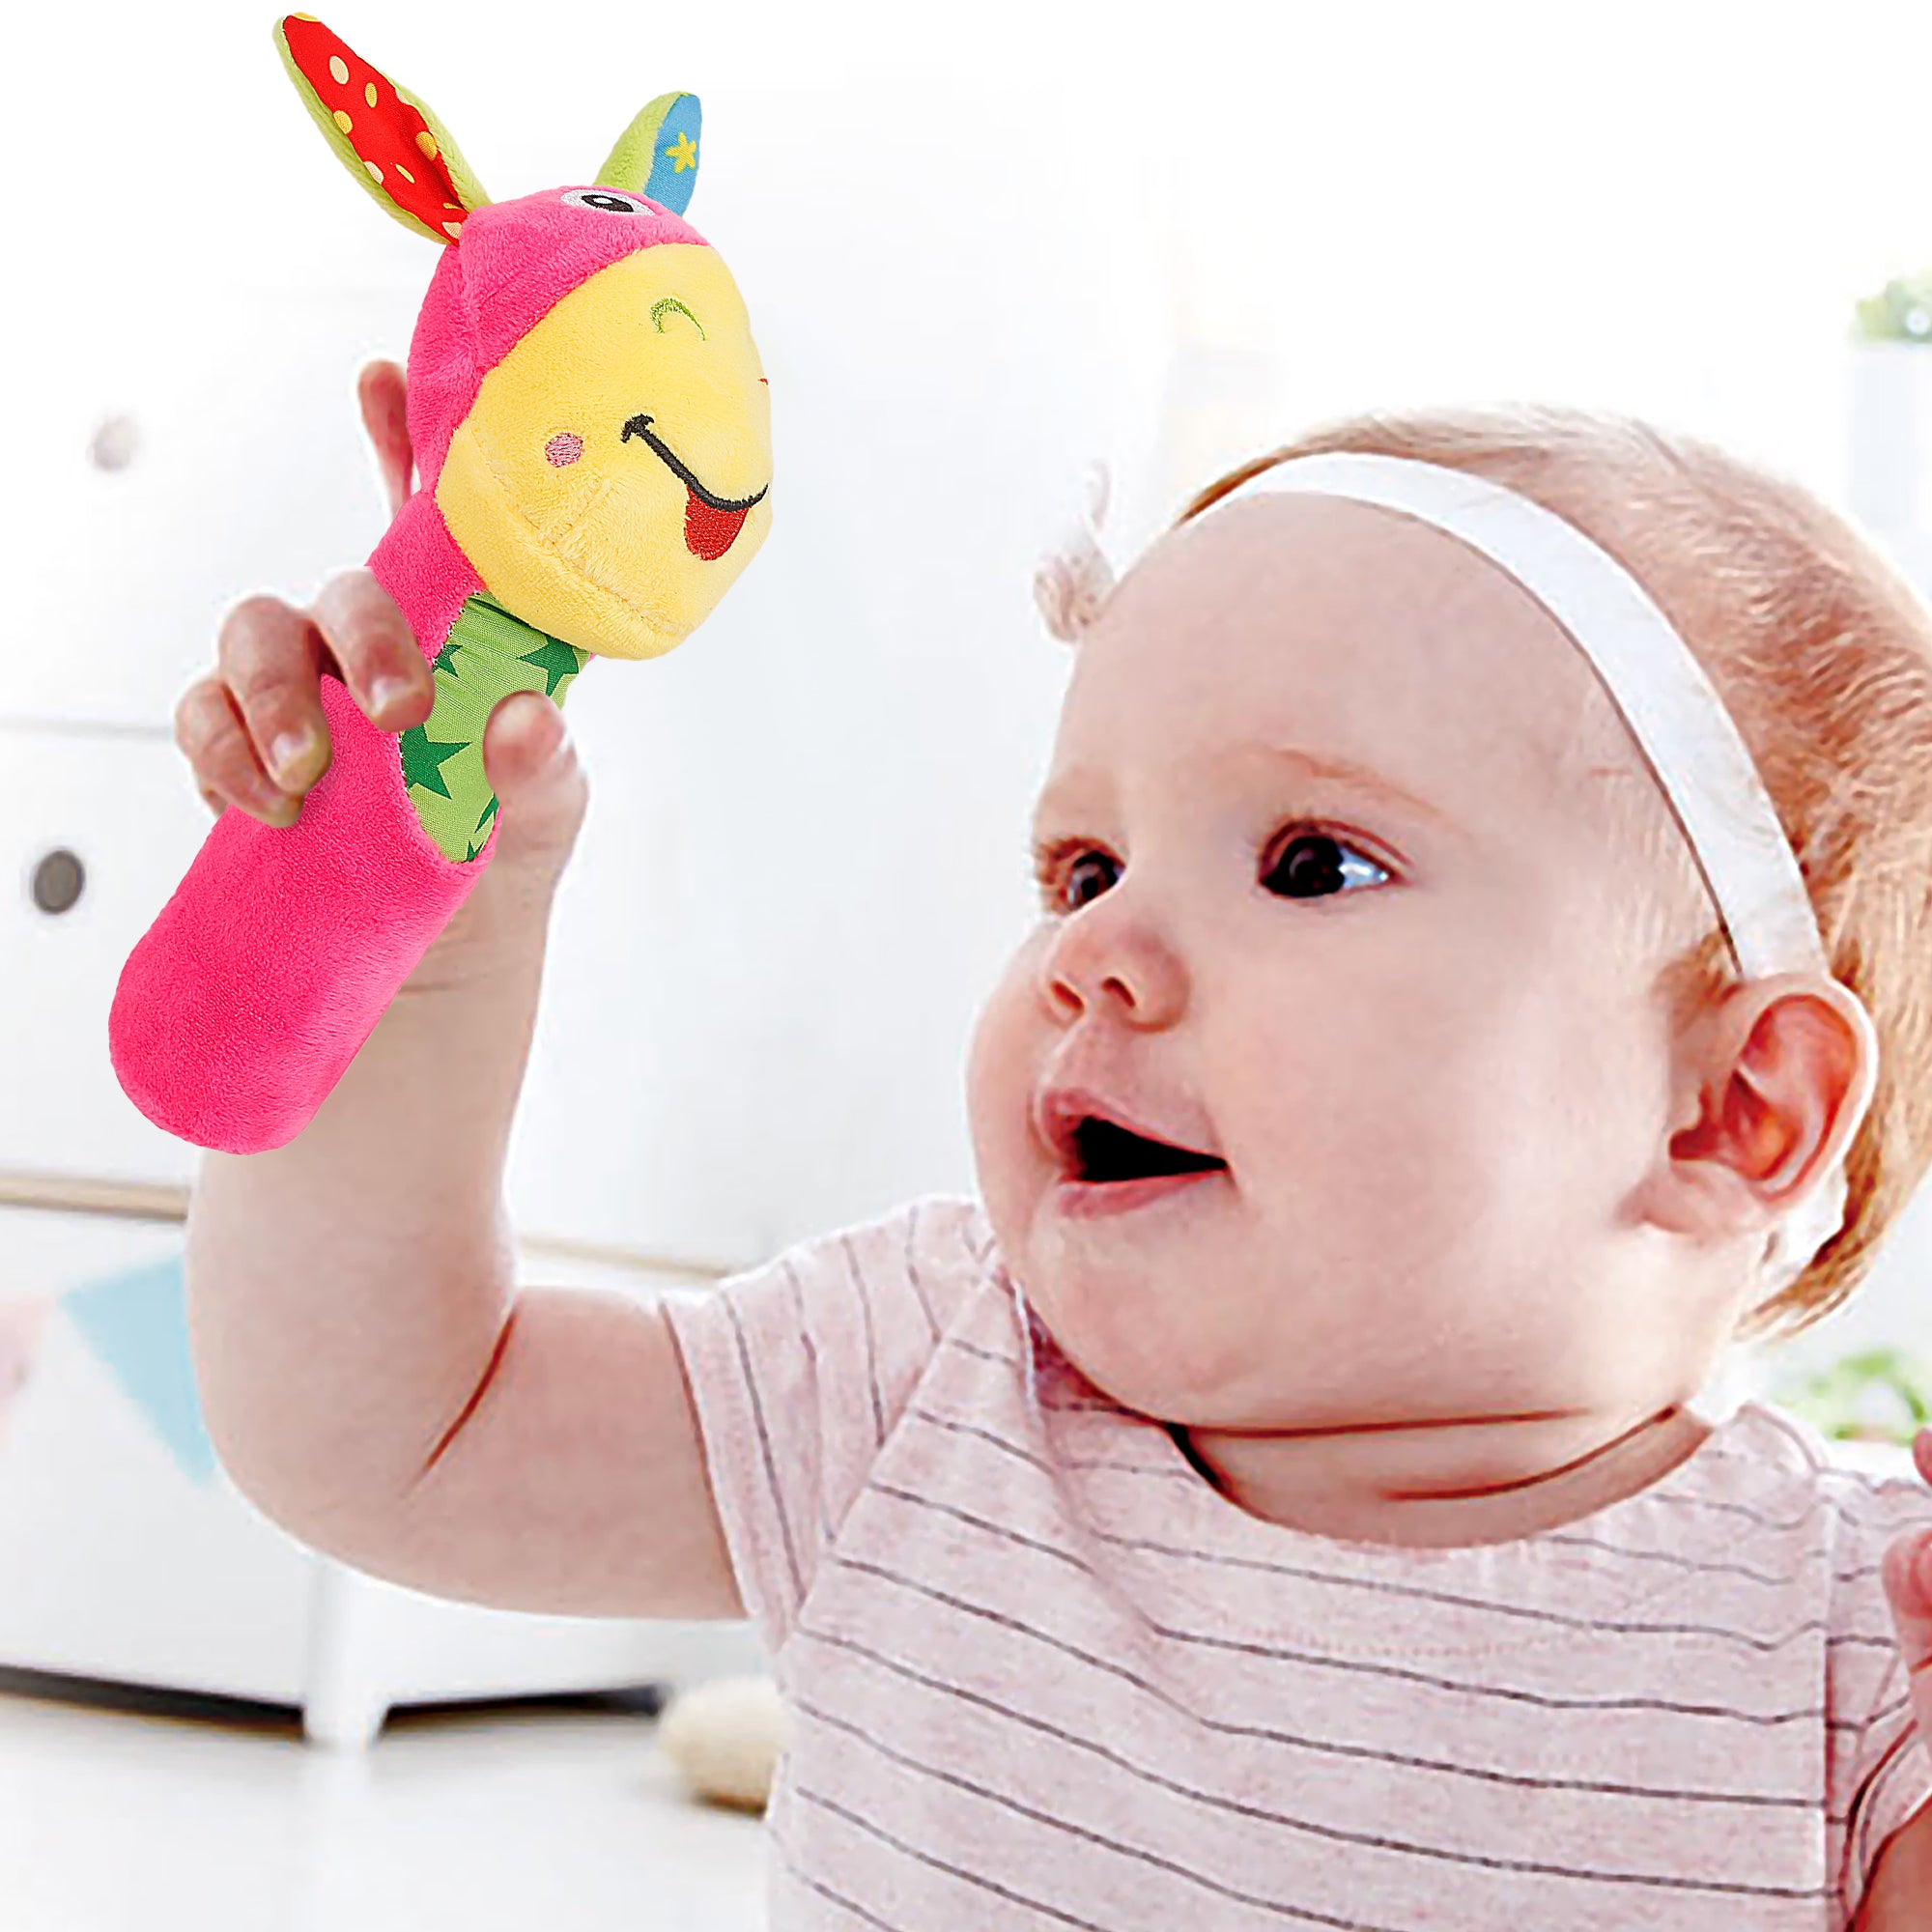 Smiling Star Pink Rattle - Baby Moo